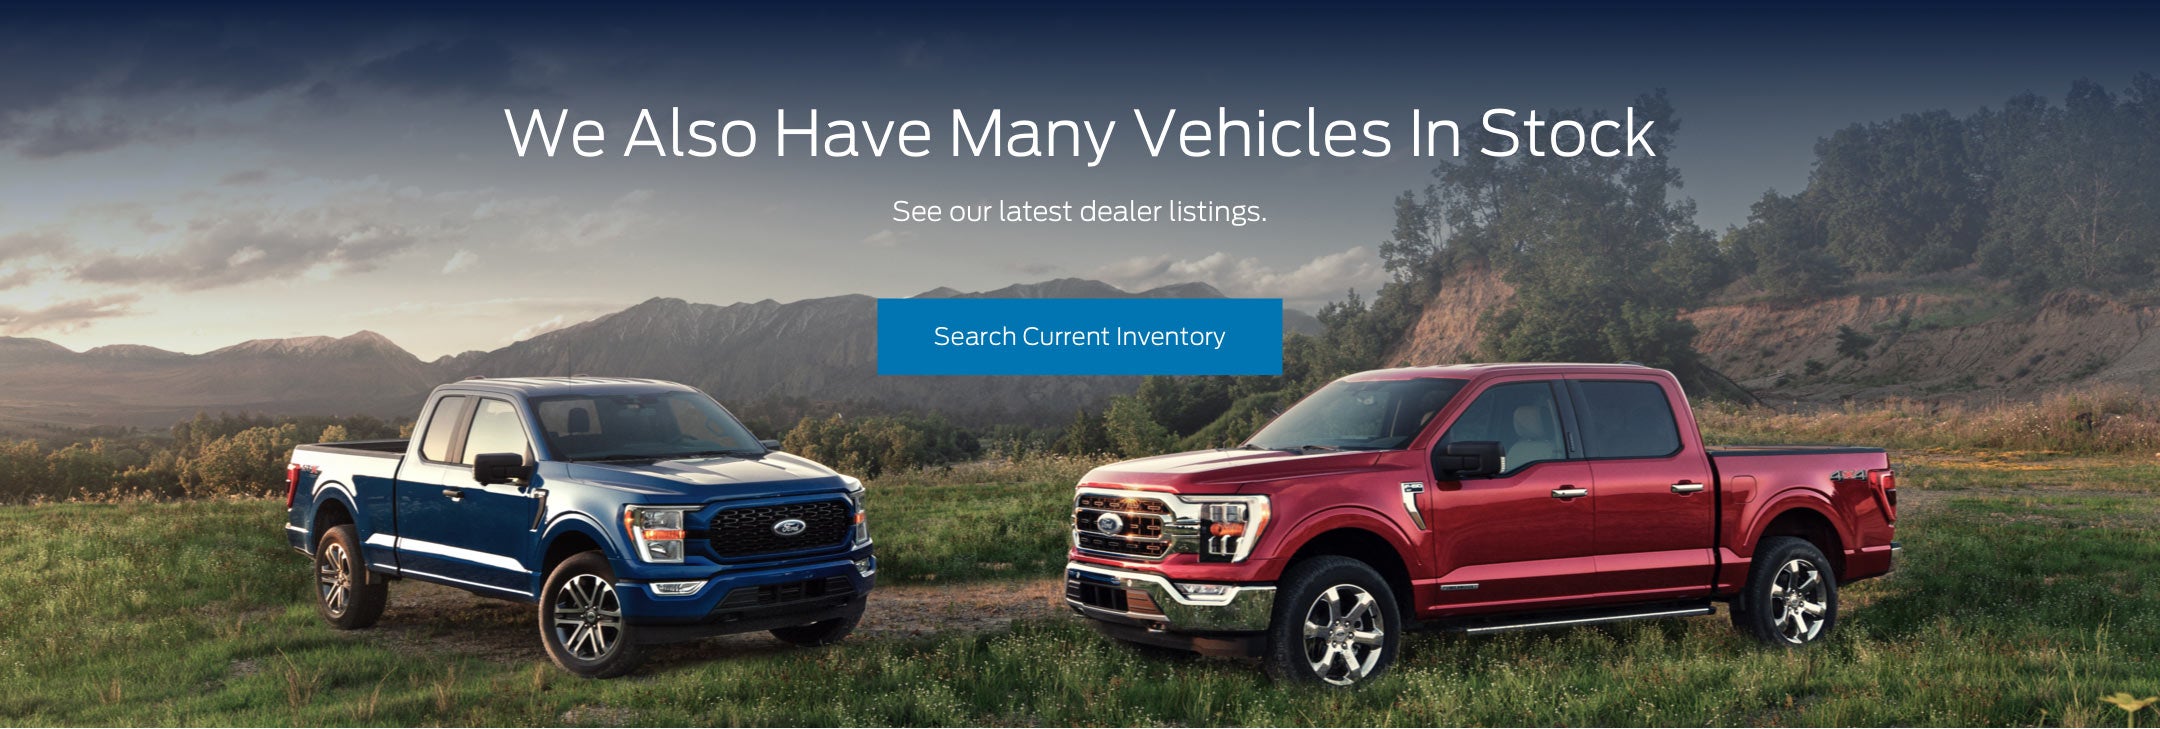 Ford vehicles in stock | Jackson Ford, Inc. in Decatur IL